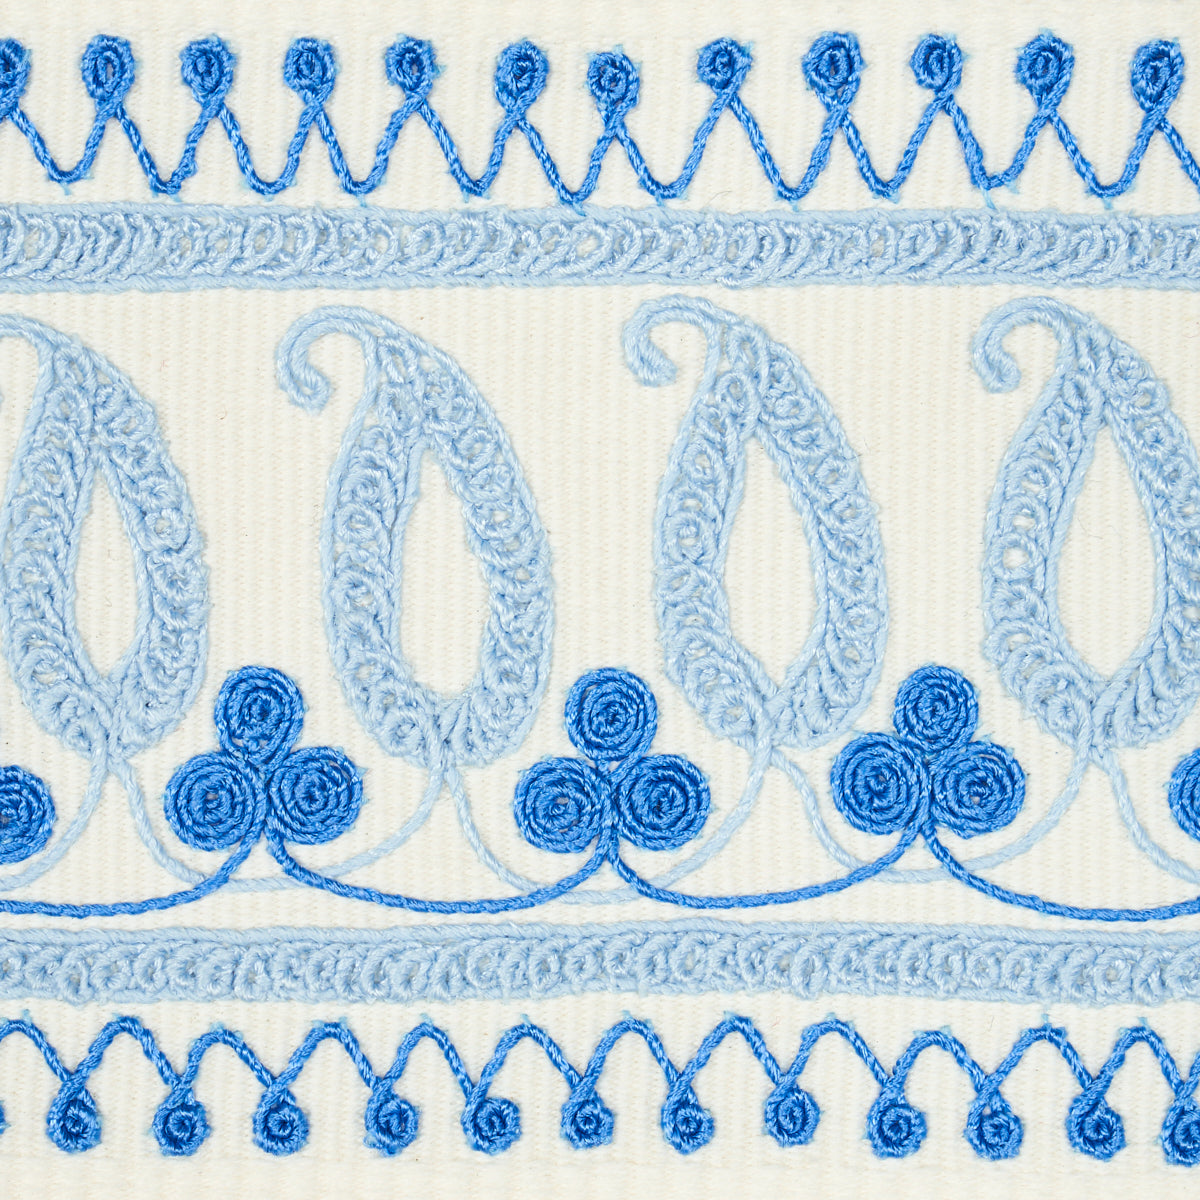 PAISLEY EMBROIDERED TAPE | BLUES